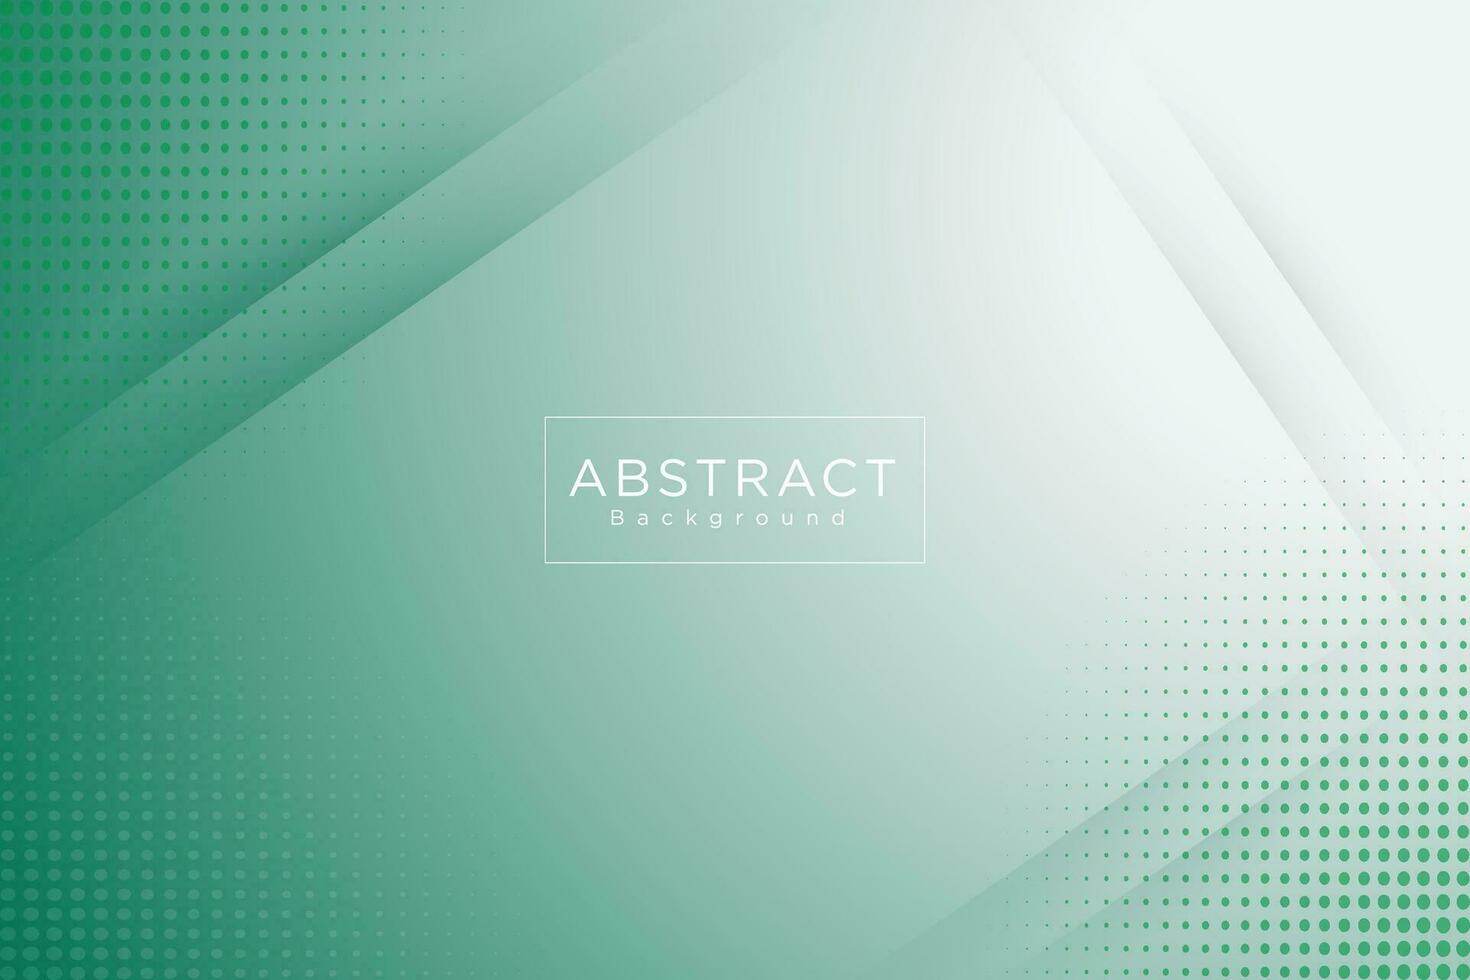 Abstract green background with lines or vector background design